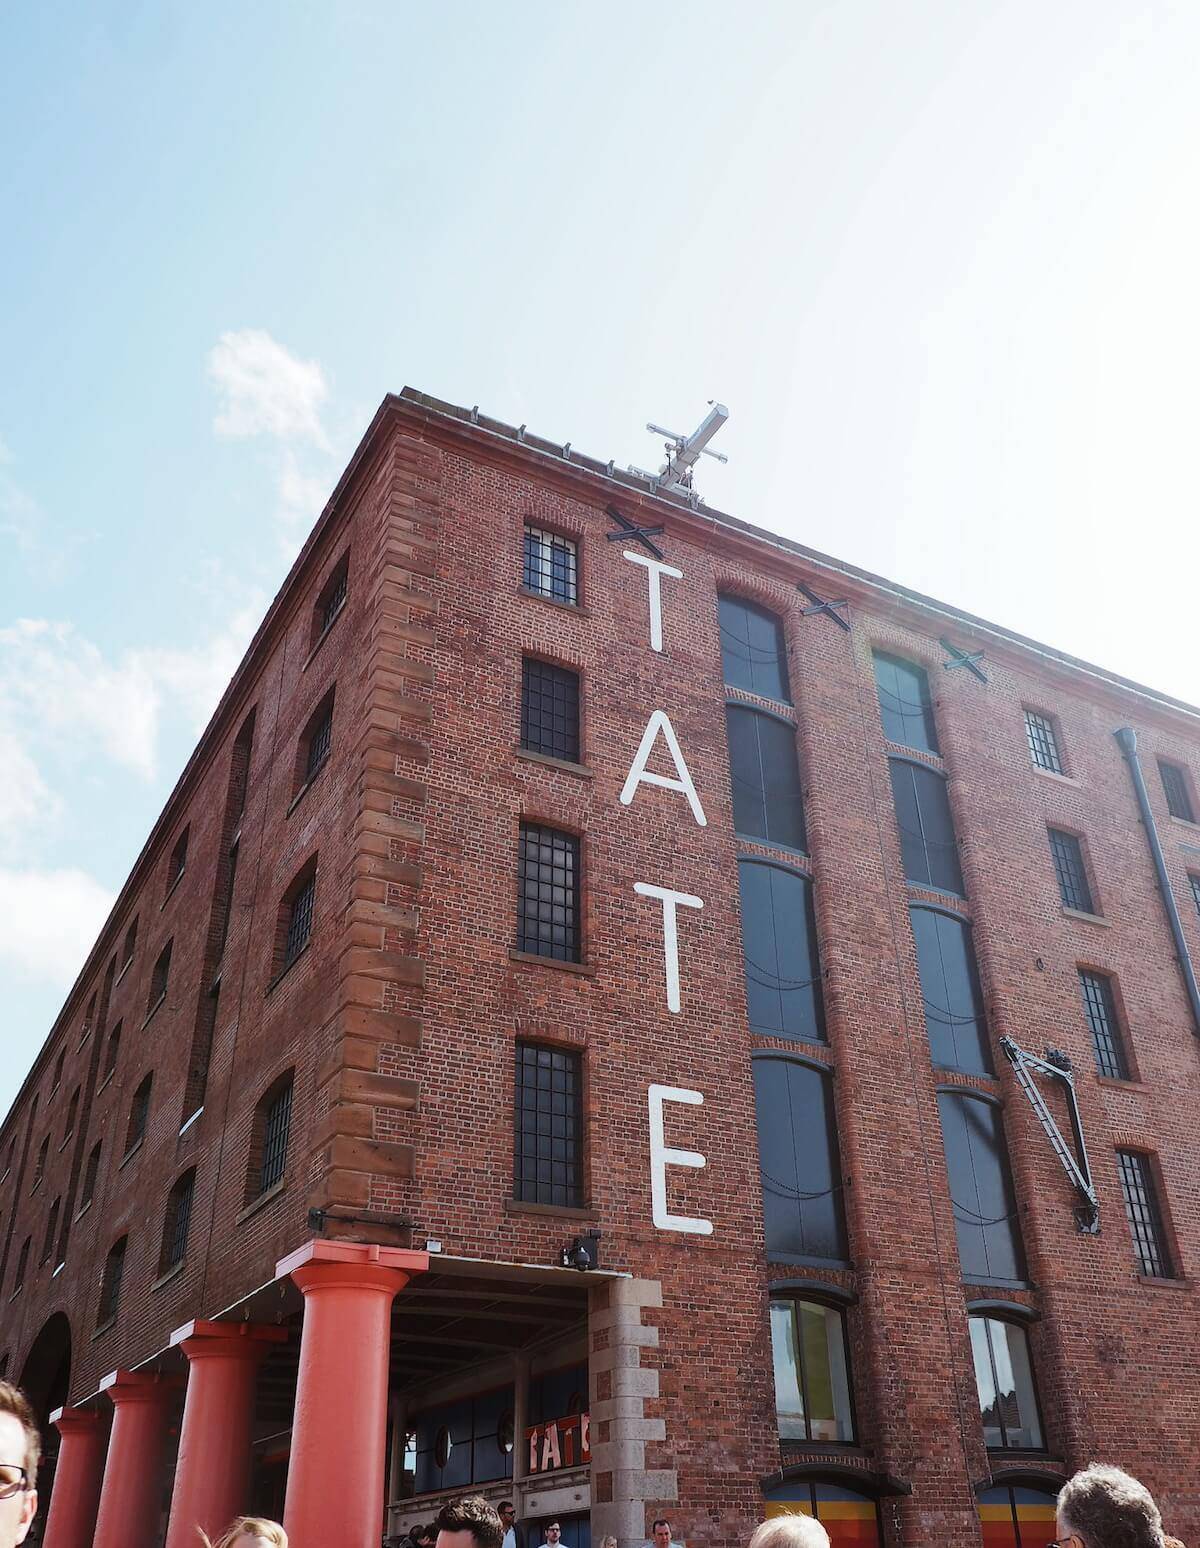 Liverpool Tate: one of the best attractions in Albert Dock